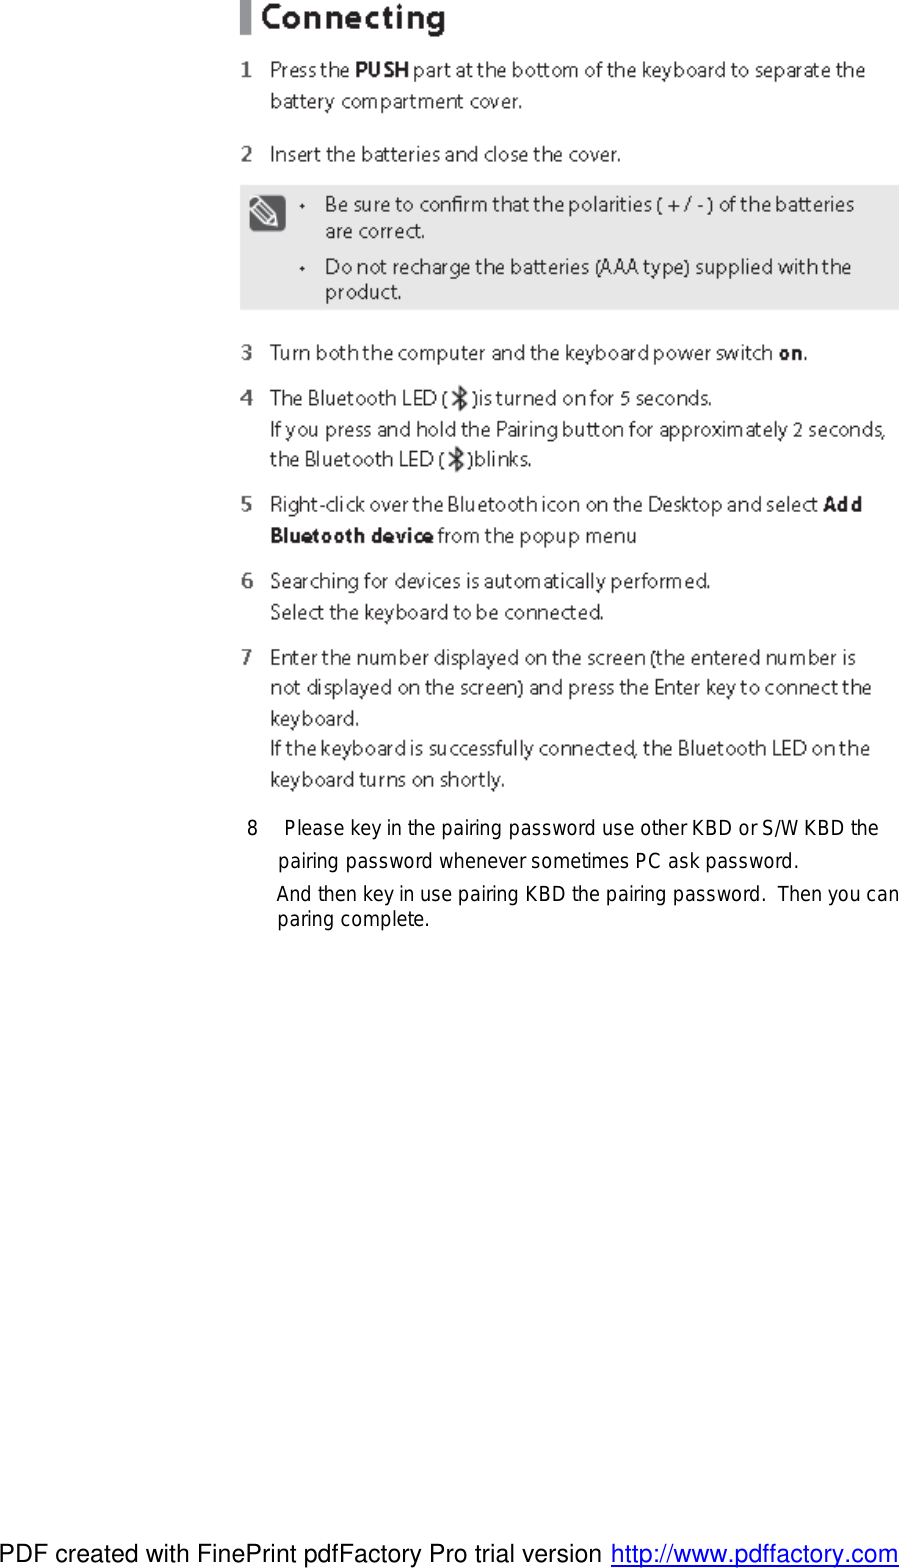  8 Please key in the pairing password use other KBD or S/W KBD the  pairing password whenever sometimes PC ask password.                And then key in use pairing KBD the pairing password. Then you can  paring complete.               PDF created with FinePrint pdfFactory Pro trial version http://www.pdffactory.com